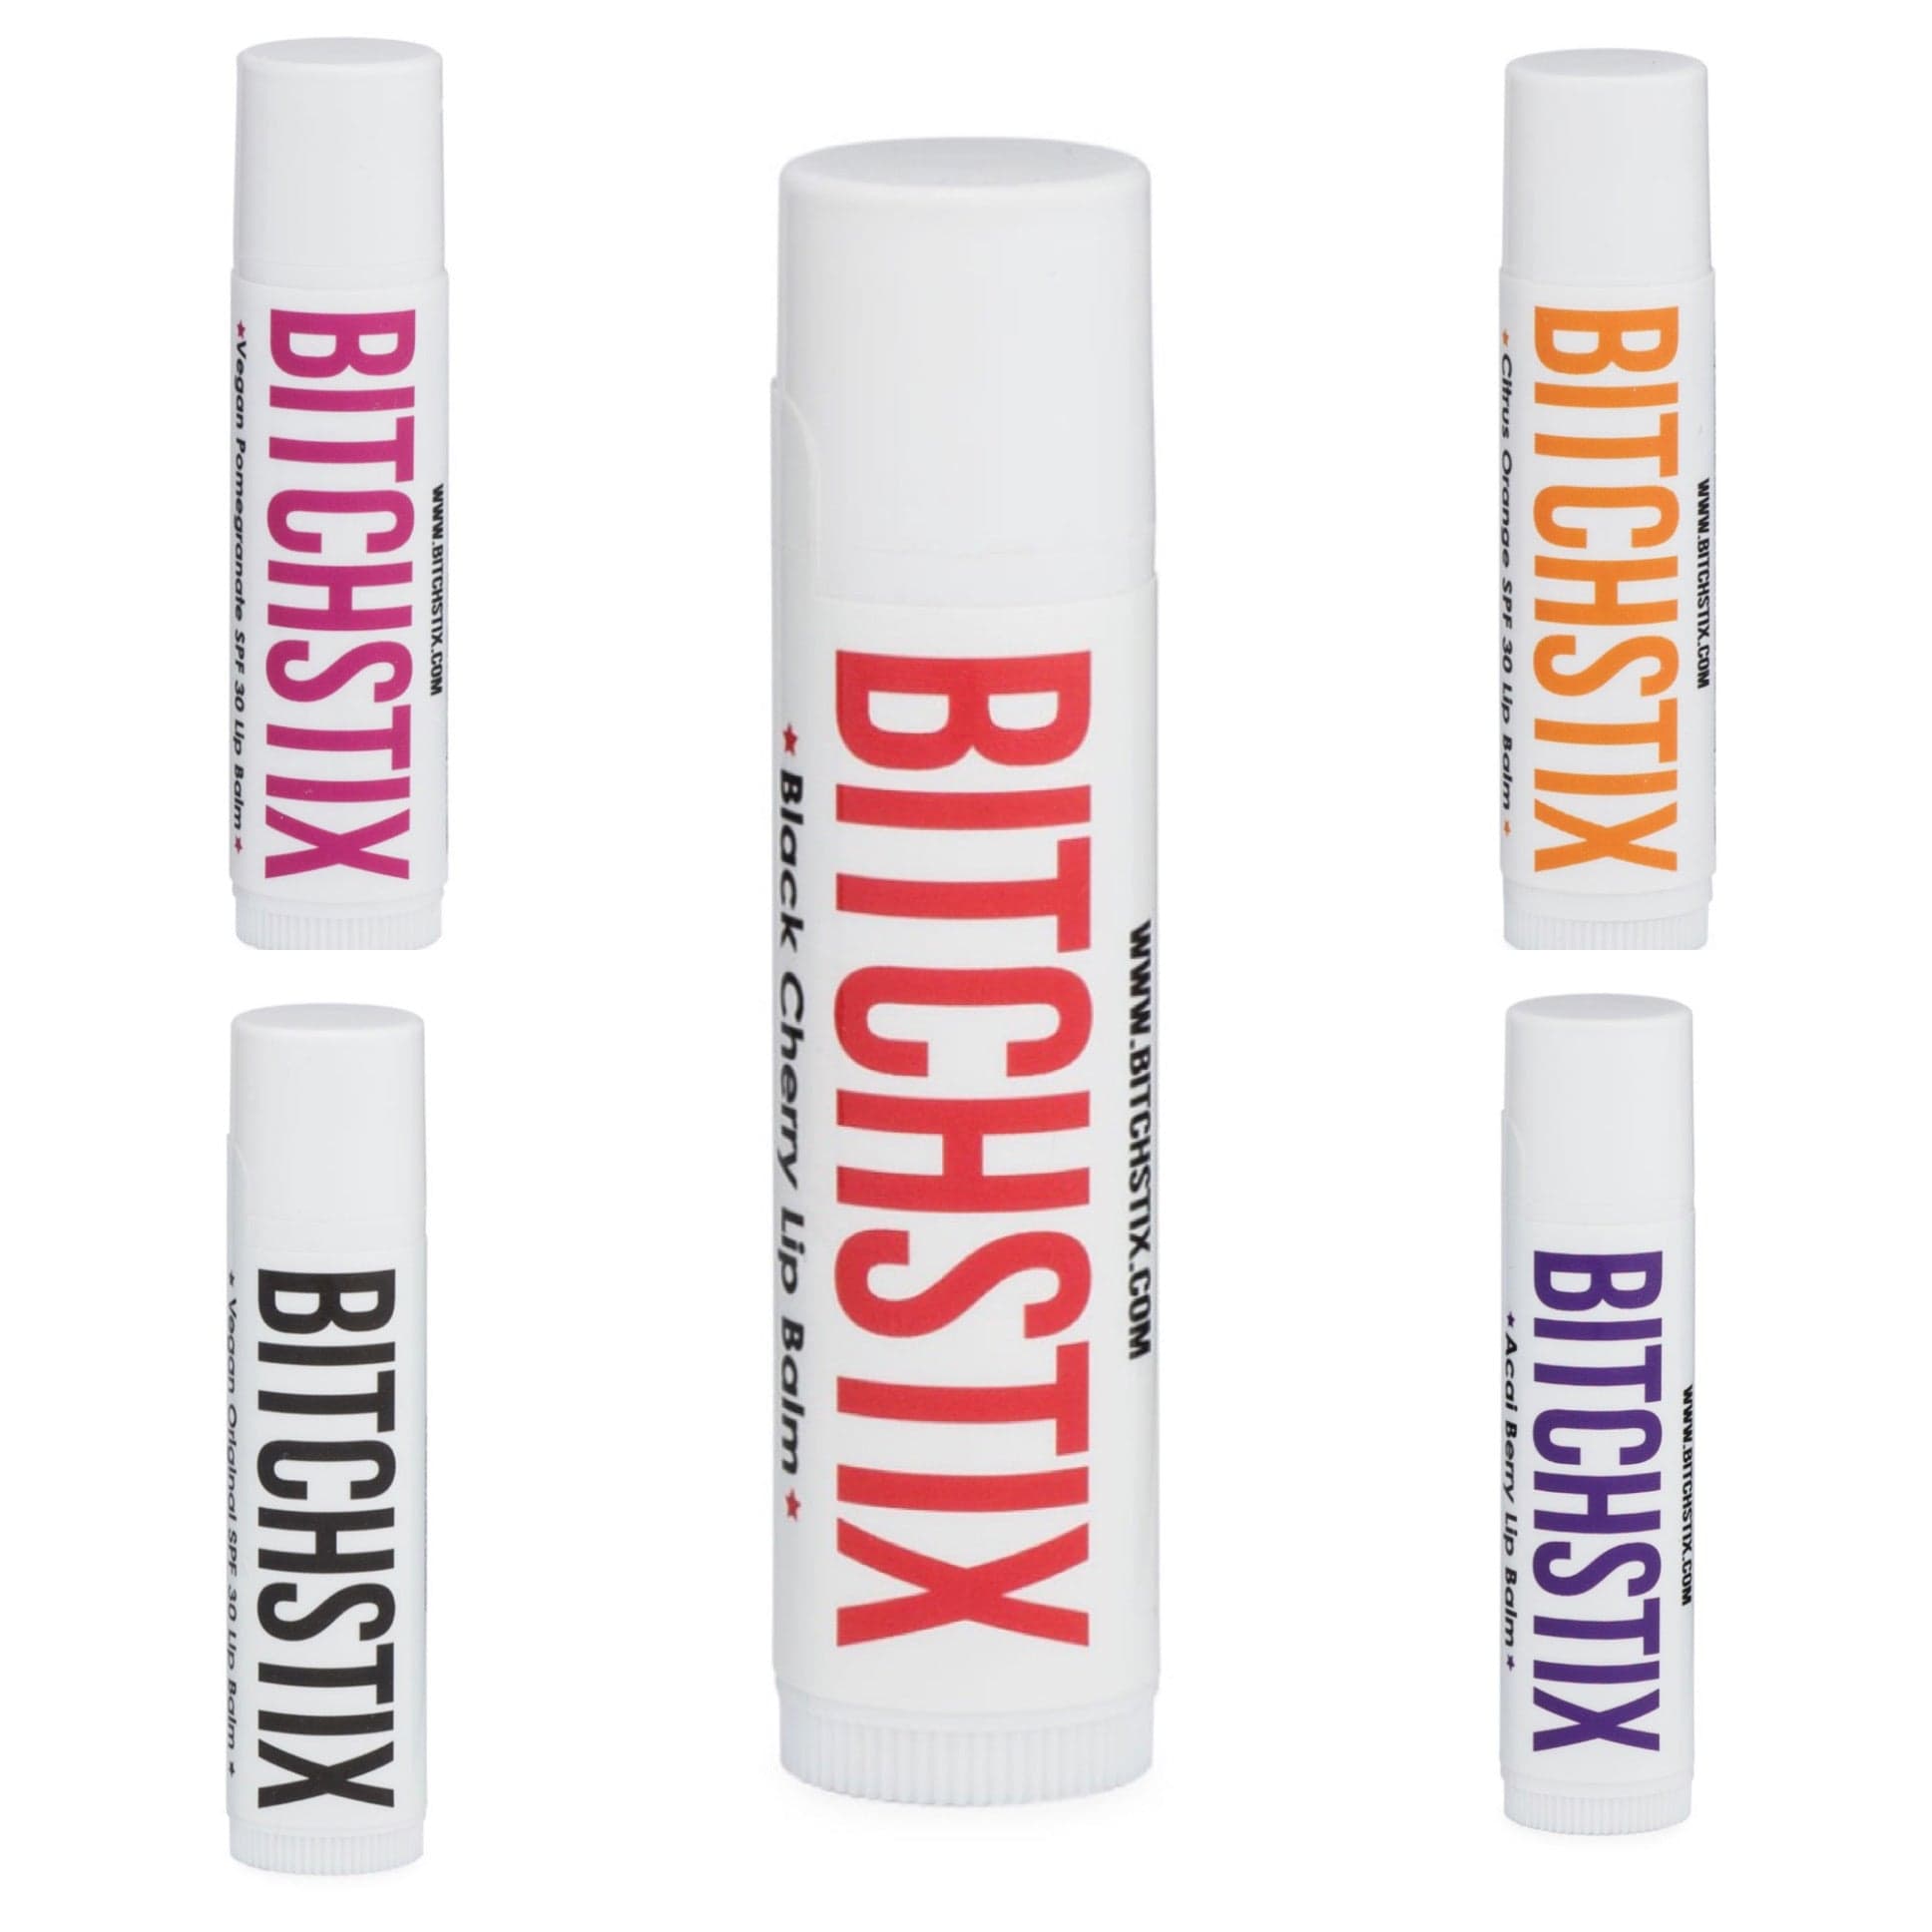 BitchStix Personal Care Bitchstix- Lip Balm Collection equestrian team apparel online tack store mobile tack store custom farm apparel custom show stable clothing equestrian lifestyle horse show clothing riding clothes Bitchstix Lip Balm at Equestrian Team Apparel horses equestrian tack store